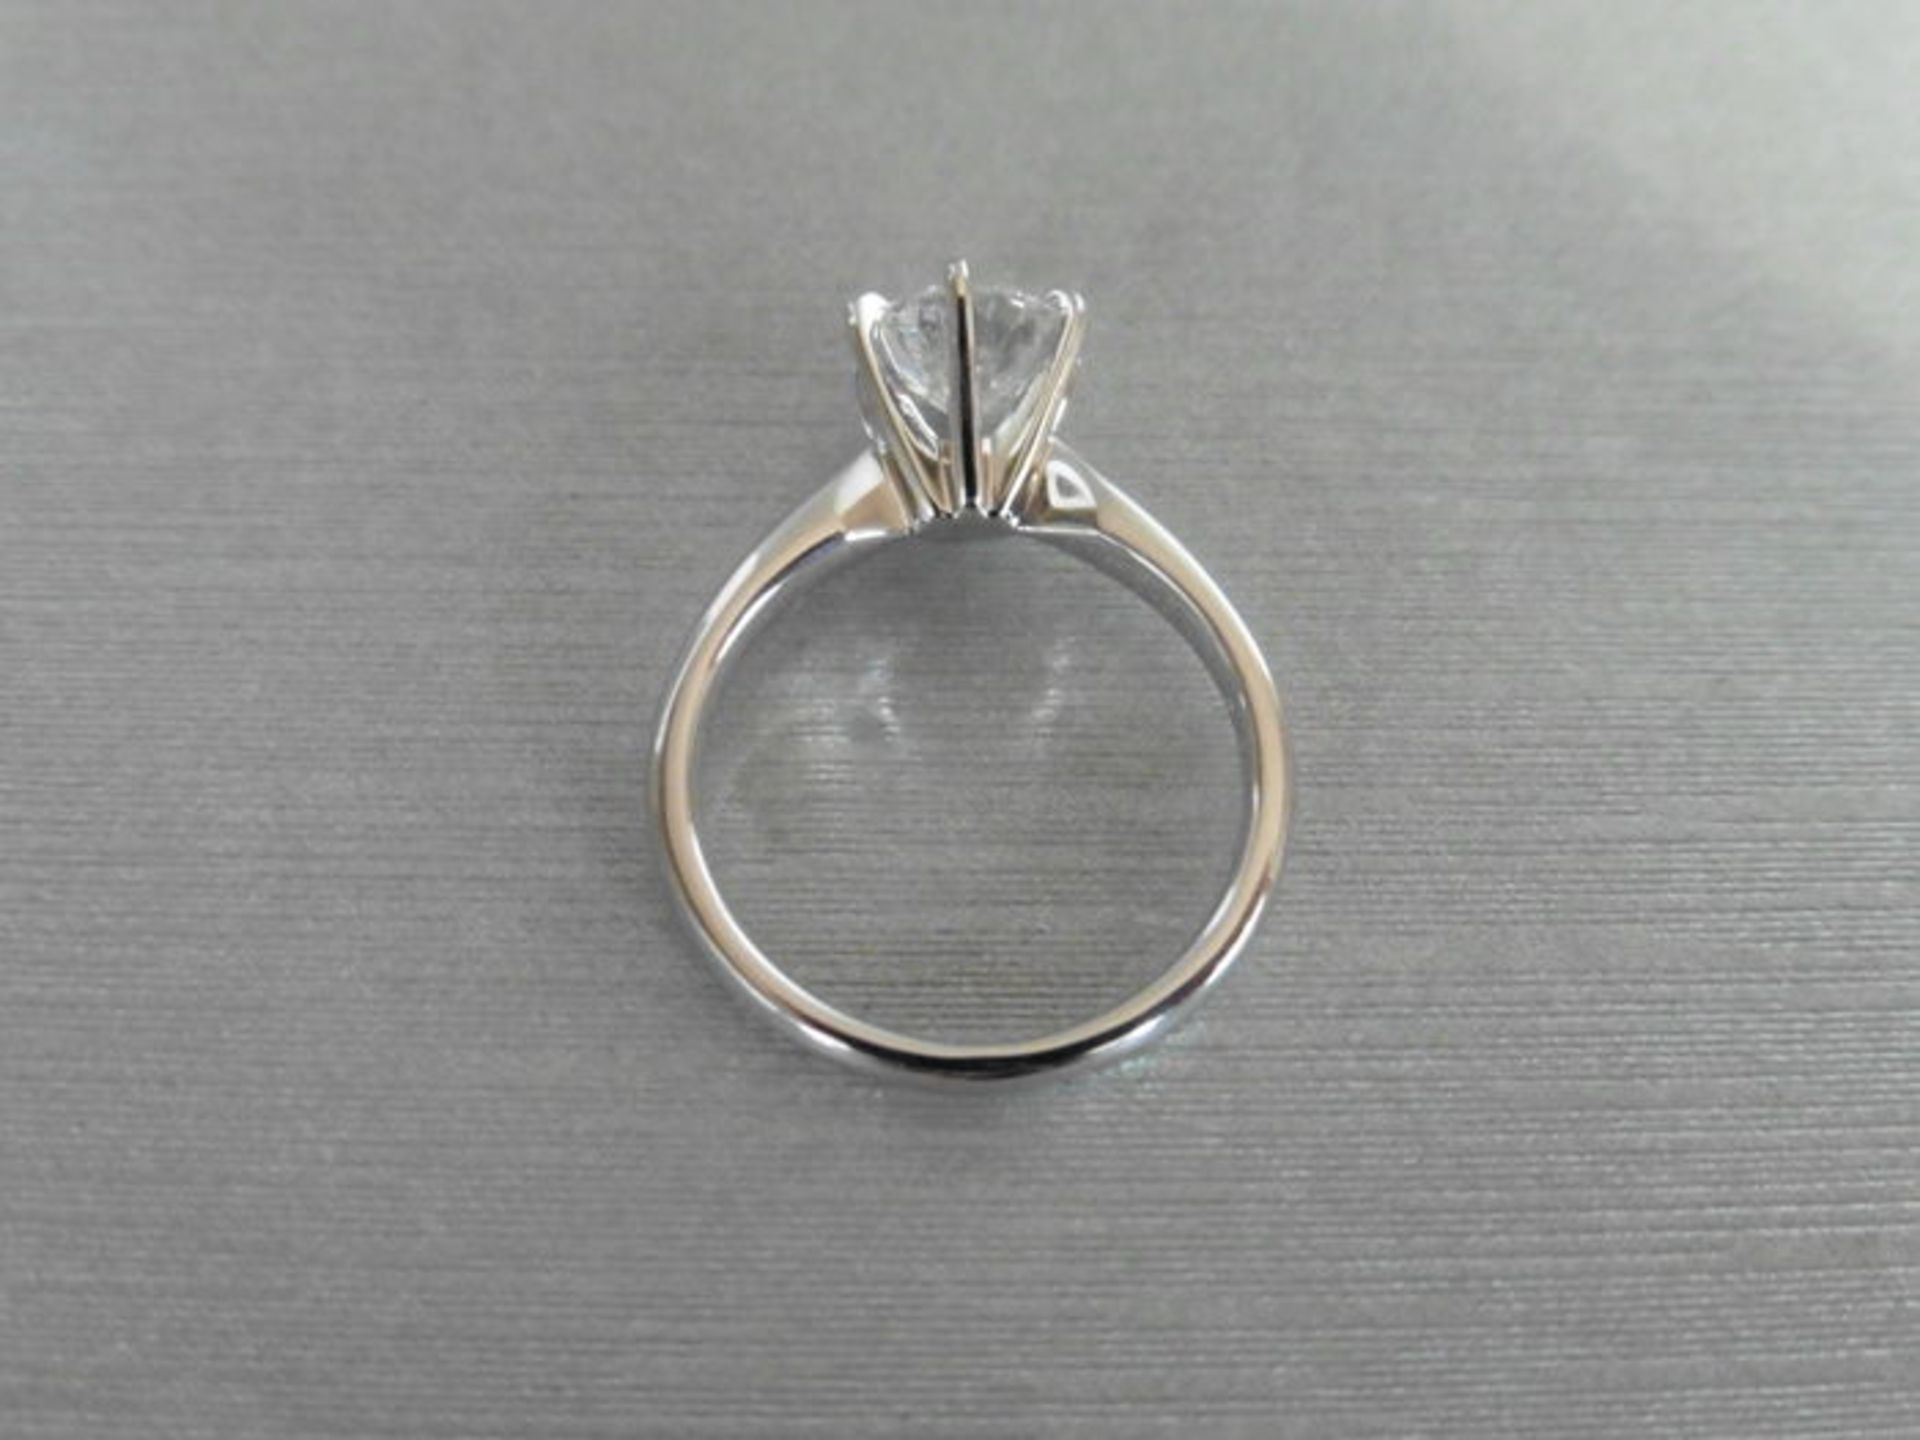 1.05ct Diamond solitaire ring with a brilliant cut diamond, J colour and Si1 clarity. Set in - Image 3 of 4